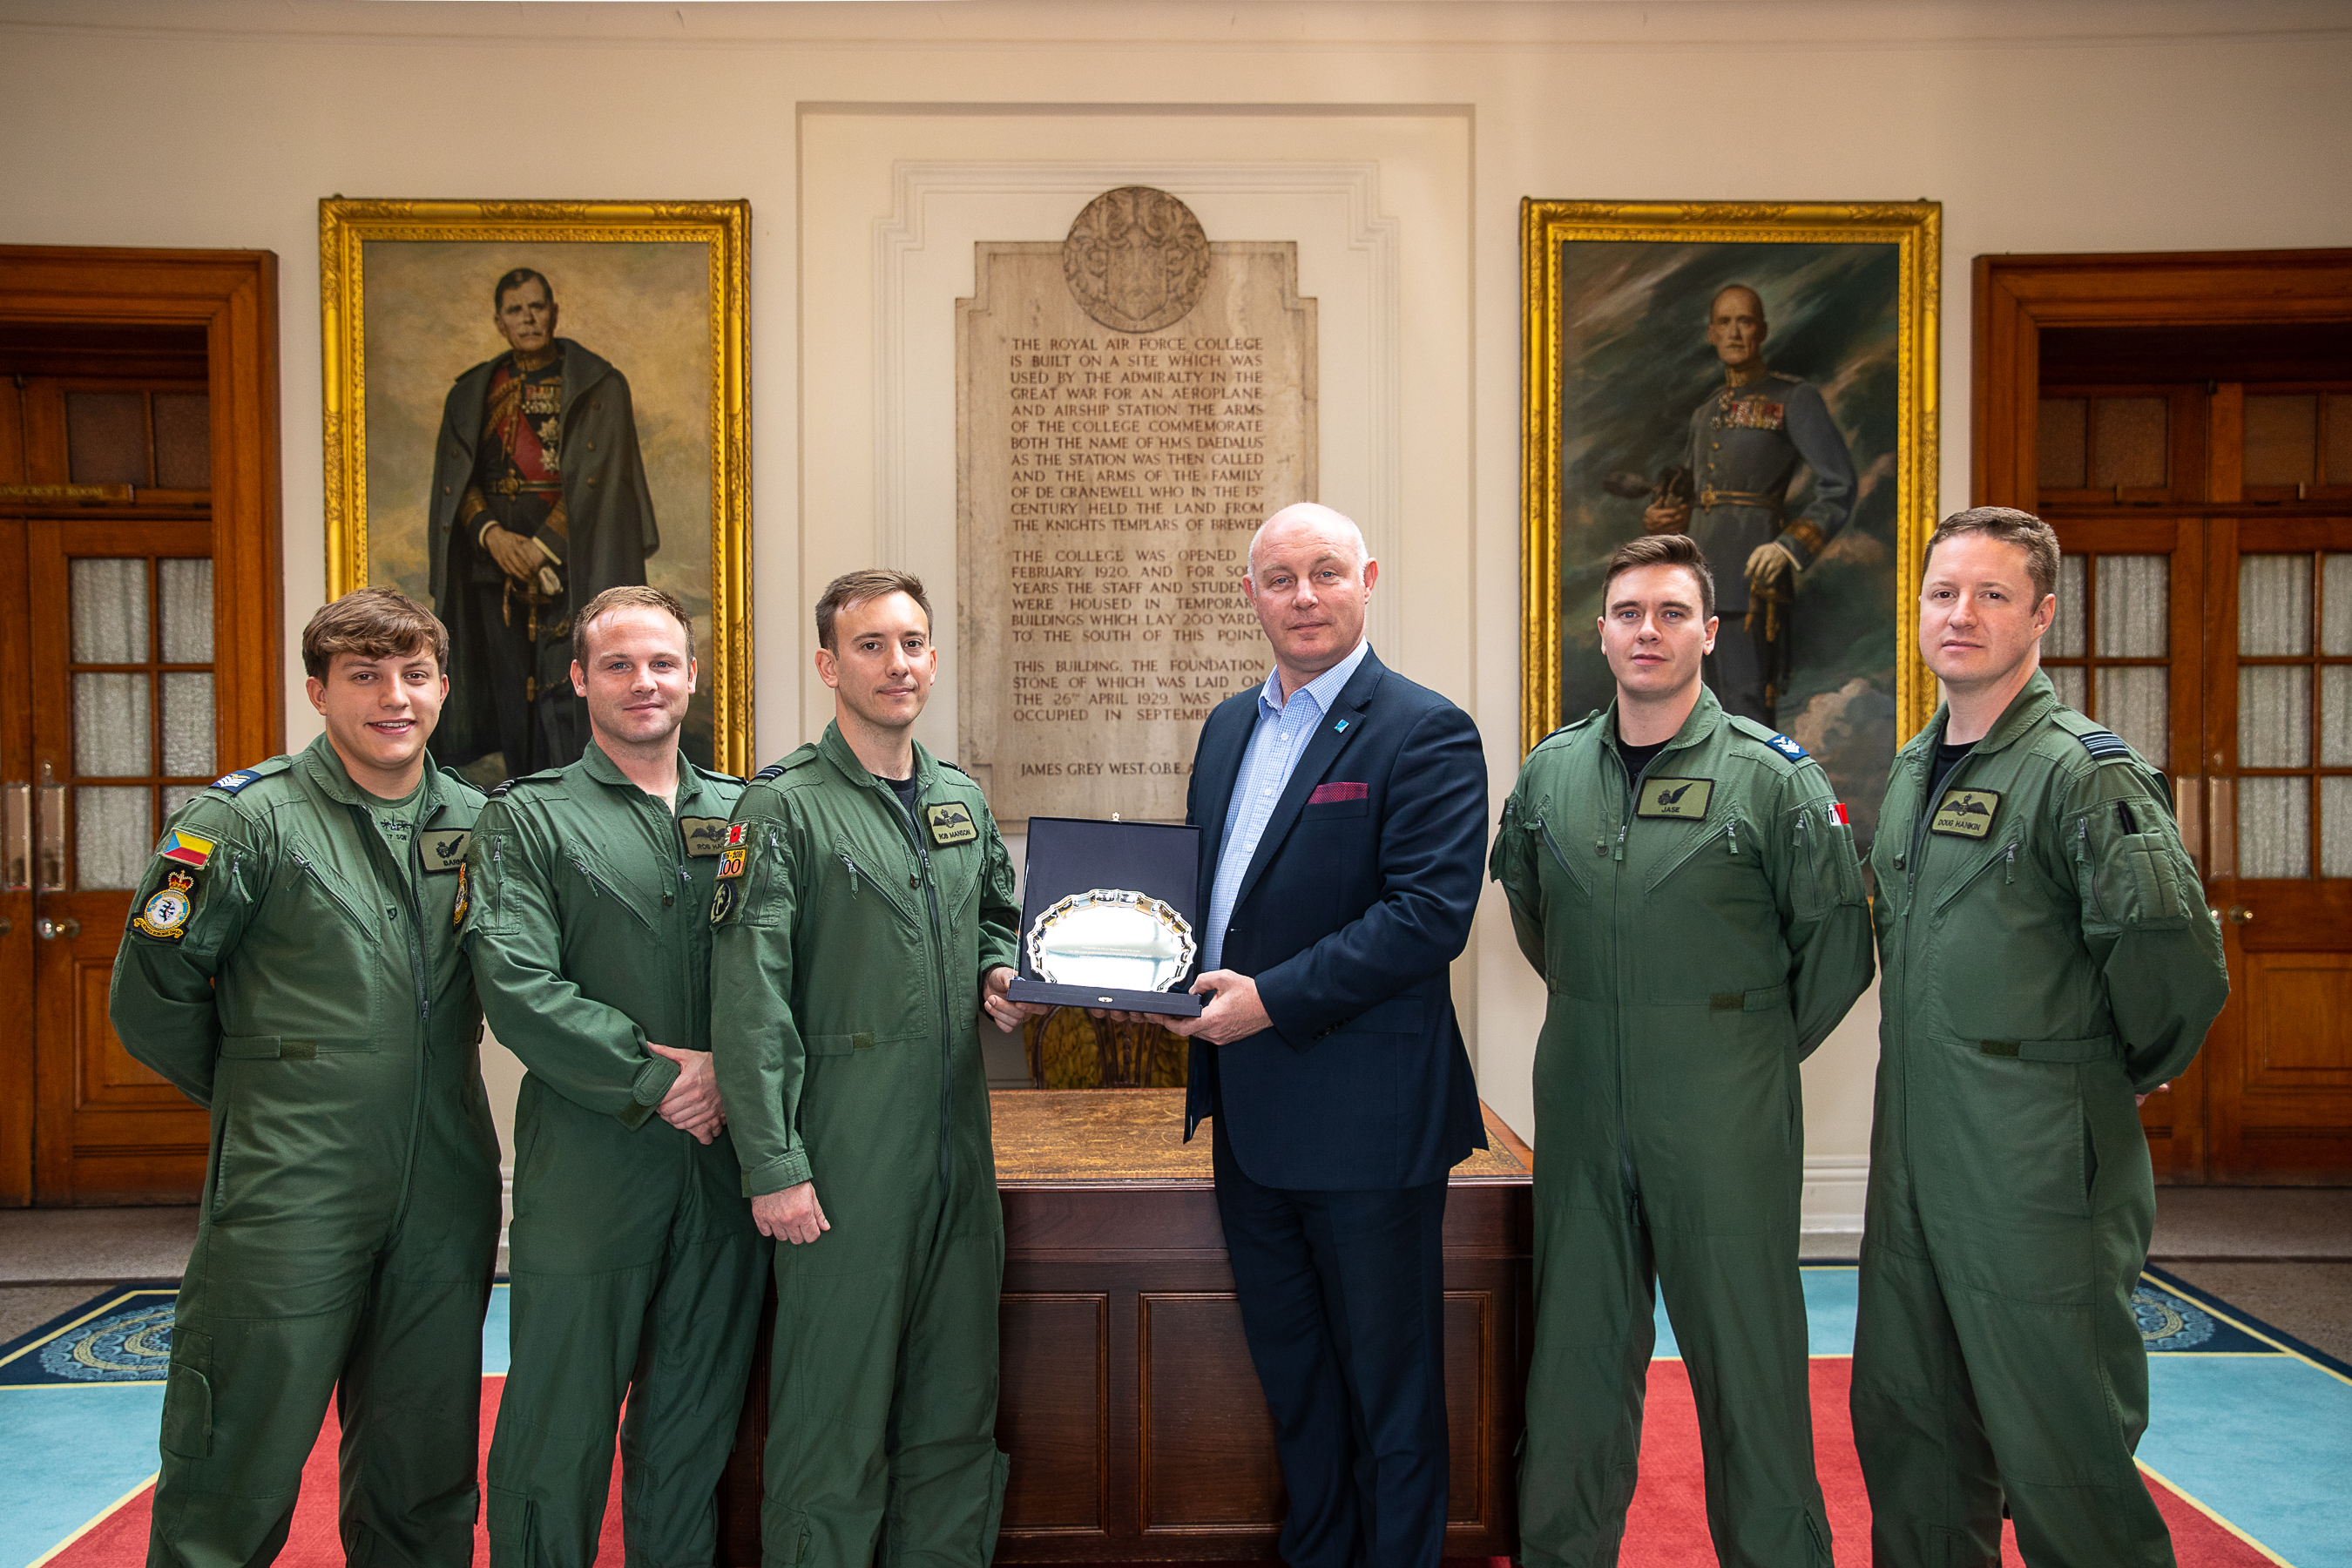 Recently, members of No. 47 Squadron, Flight Lieutenants Robert Manson and Robert Hanson, together with Sergeants Jason Roy and Timothy Gilbert, and Aircraft Ground Engineers Chief Technicians Gareth Spain and Michael Lake, received the Arthur Barratt Memorial Prize during a ceremony held at RAF Cranwell.